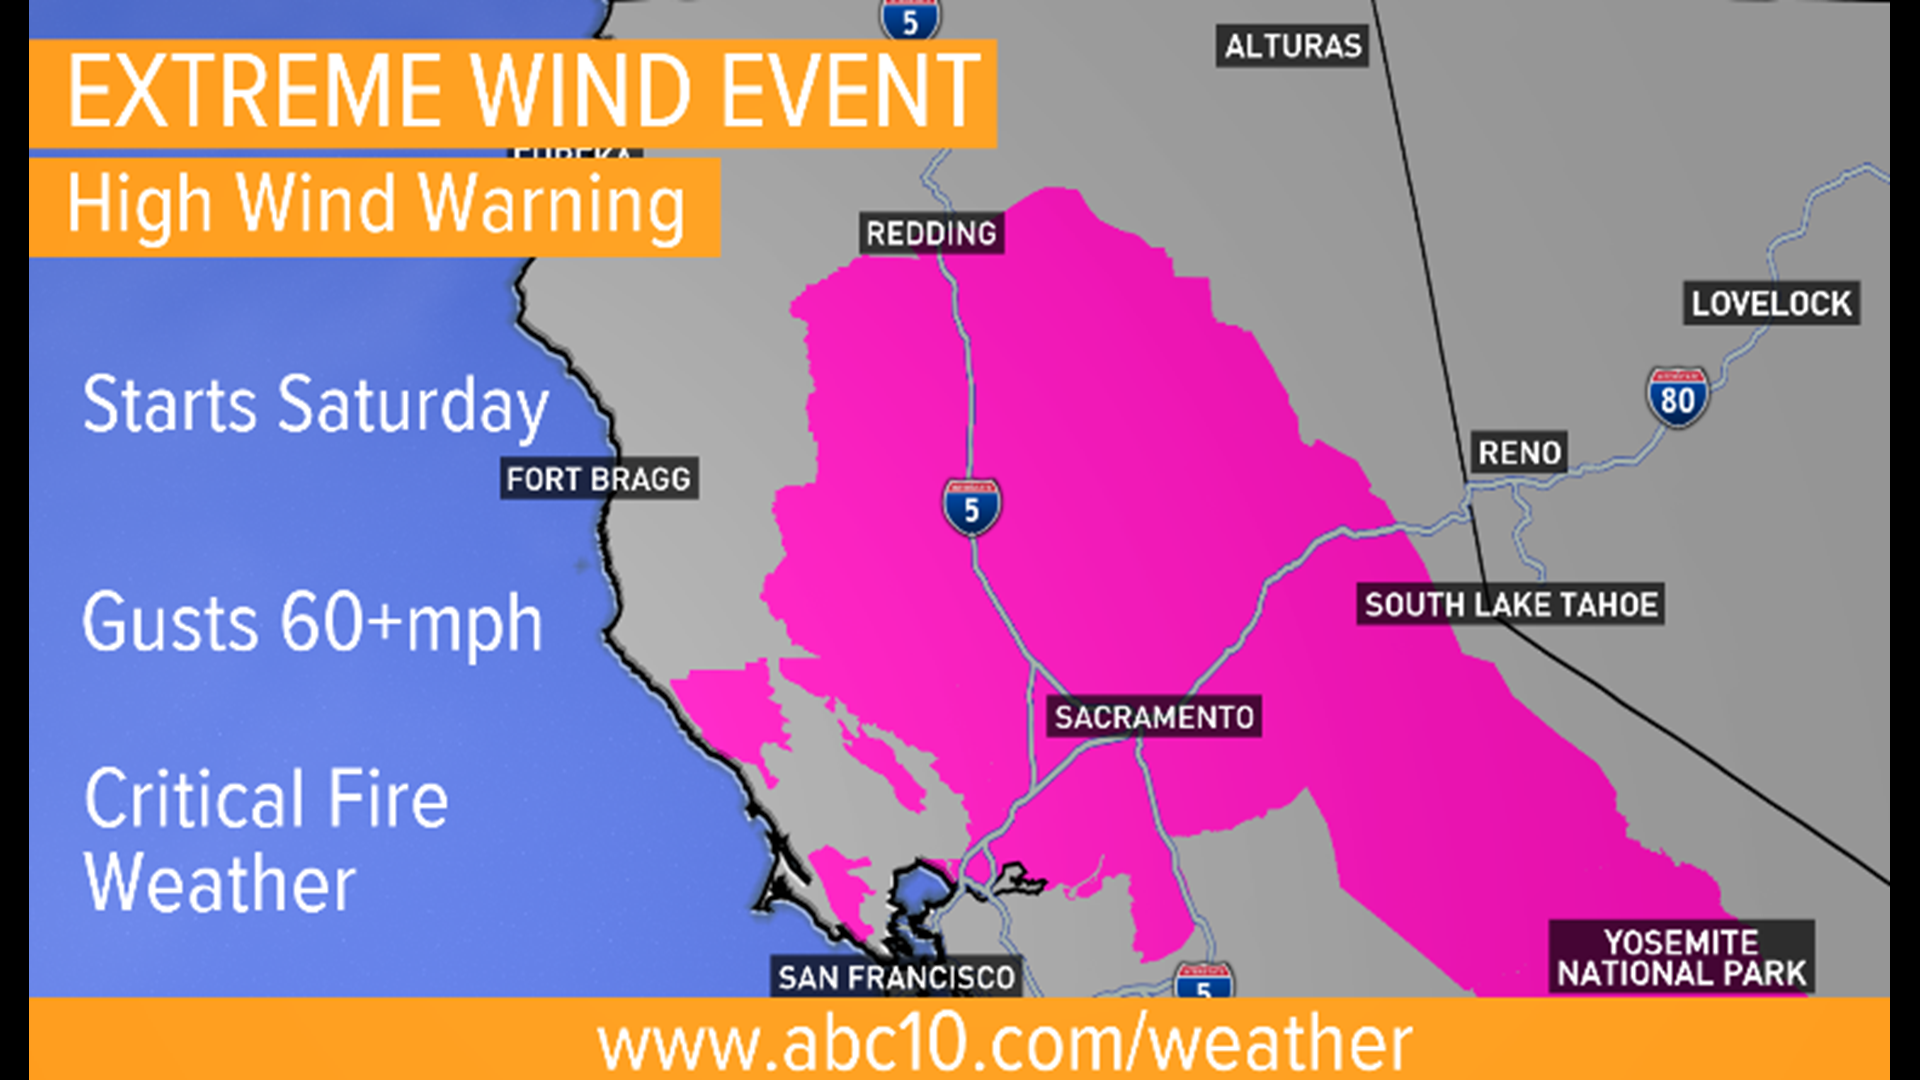 High winds remain in the forecast overnight.  Winds will begin to diminish early Monday morning.  The Red Flag Warning is in effect til 11am Monday.